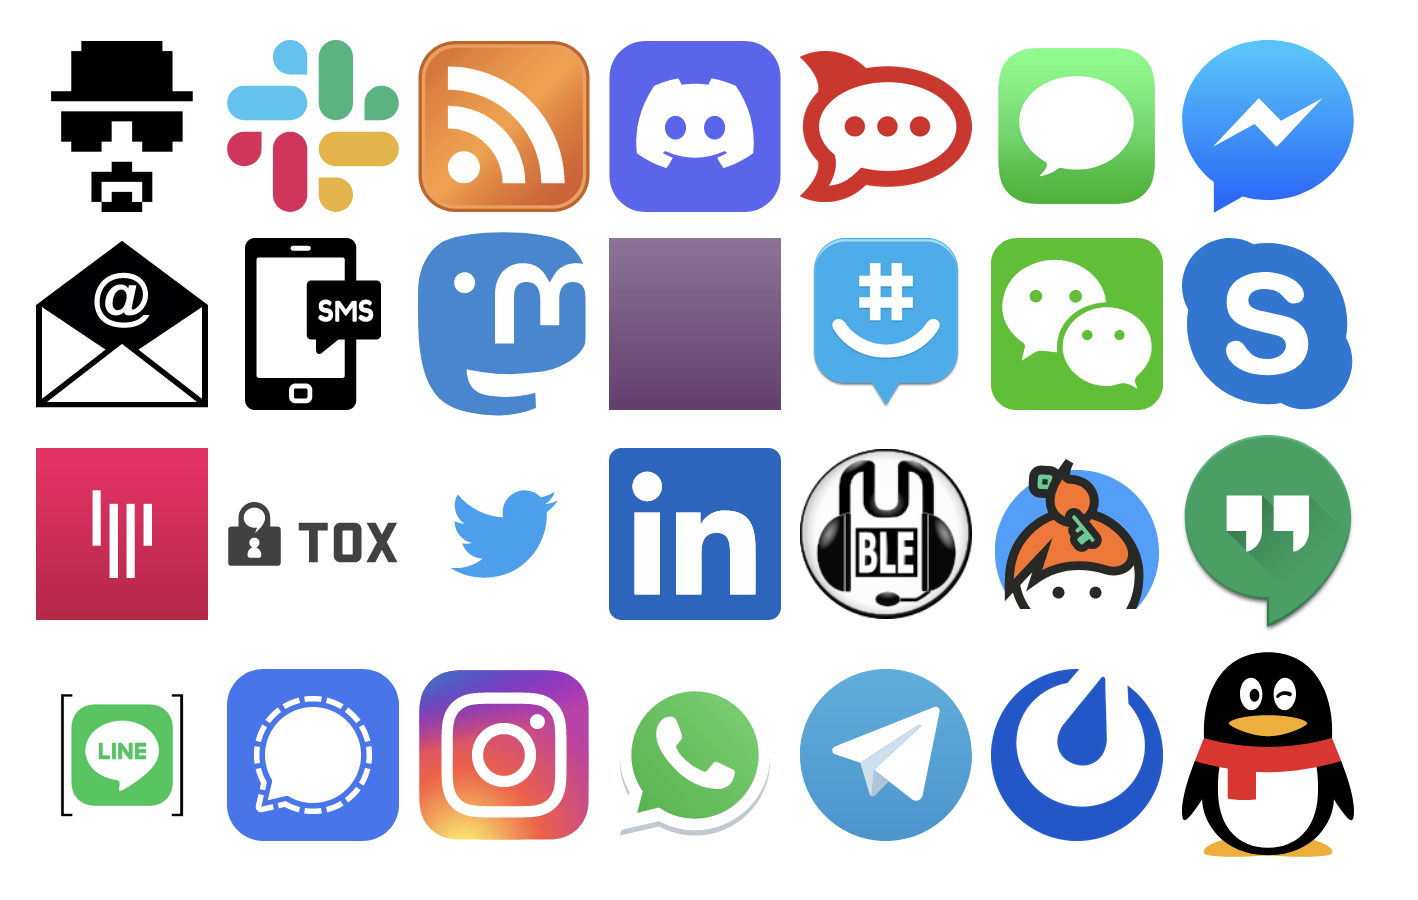 Logos for 28 apps that Element works and interoperates with.